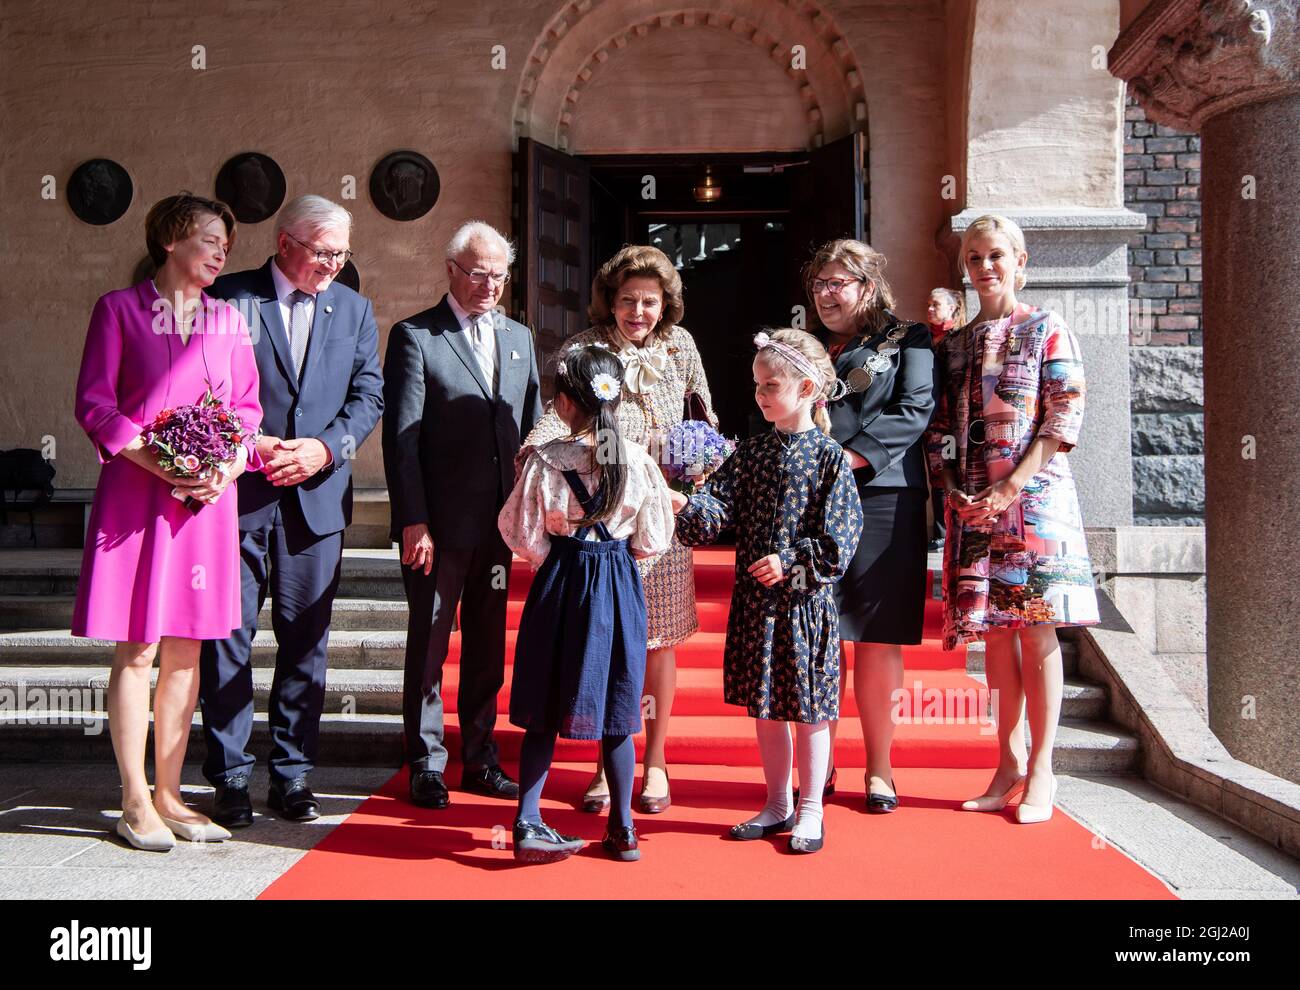 08 September 2021, Sweden, Södertälje: Federal President Frank-Walter Steinmeier (2nd from left) and his wife Elke Büdenbender (l), together with King Carl XVI Gustaf (3rd from left) and Queen Silvia (M) of Sweden, are welcomed by Cecilia Brinck, Chairwoman of Stockholm City Council, and Anna König Jerlmyr (r), Lord Mayor of Stockholm, at the Vault of One Hundred in Stockholm City Hall. President Steinmeier and his wife are in Sweden on a three-day state visit at the invitation of the Swedish royal couple. Photo: Bernd von Jutrczenka/dpa Stock Photo